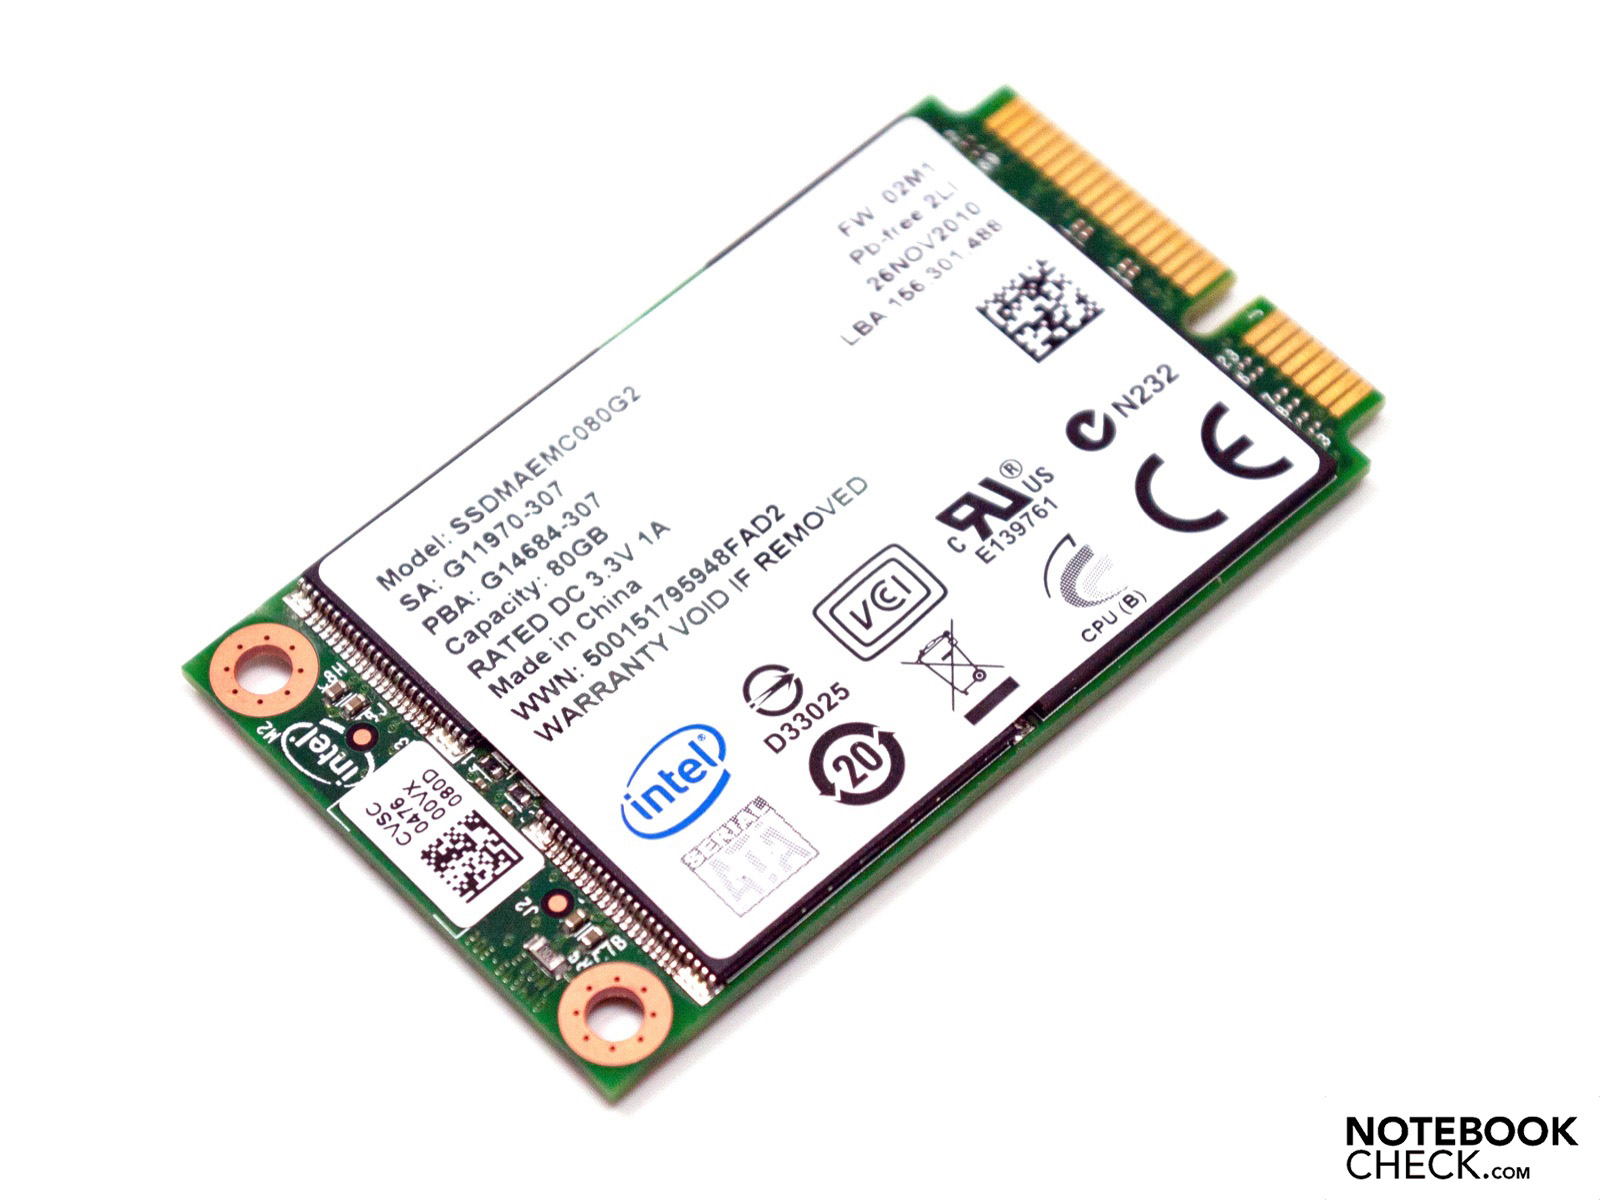 Funny Mystery Pacific Review Intel Series 310 Solid State Drive (SSD, 80 GB, mSATA) -  NotebookCheck.net Reviews